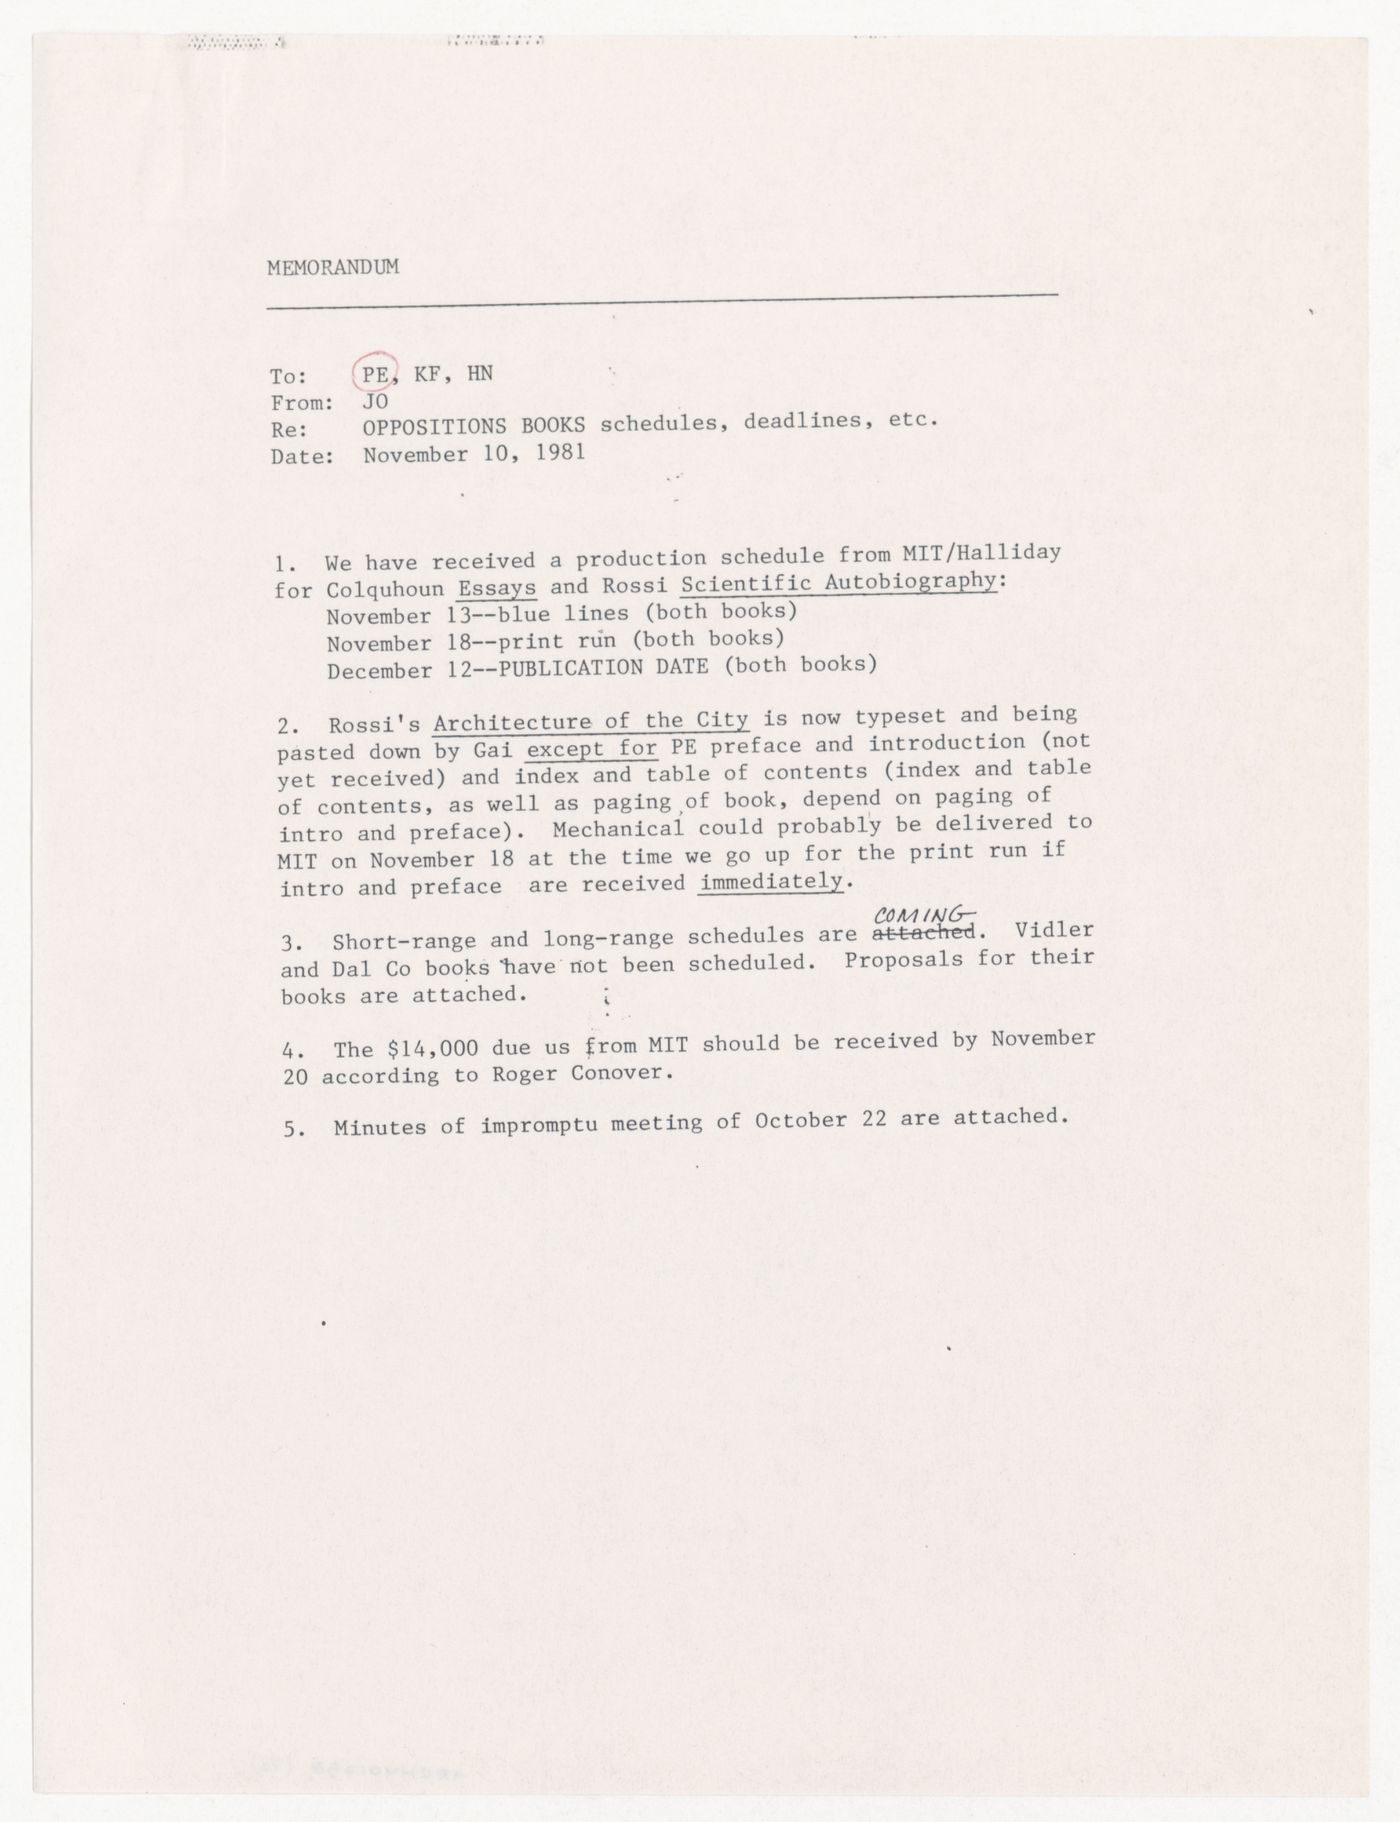 Memorandum from Joan Ockman to Peter D. Eisenman, Kenneth Frampton and Hamid R. Nouri about Oppositions Books production schedule with attached minutes of editorial meeting of October 22nd, 1981